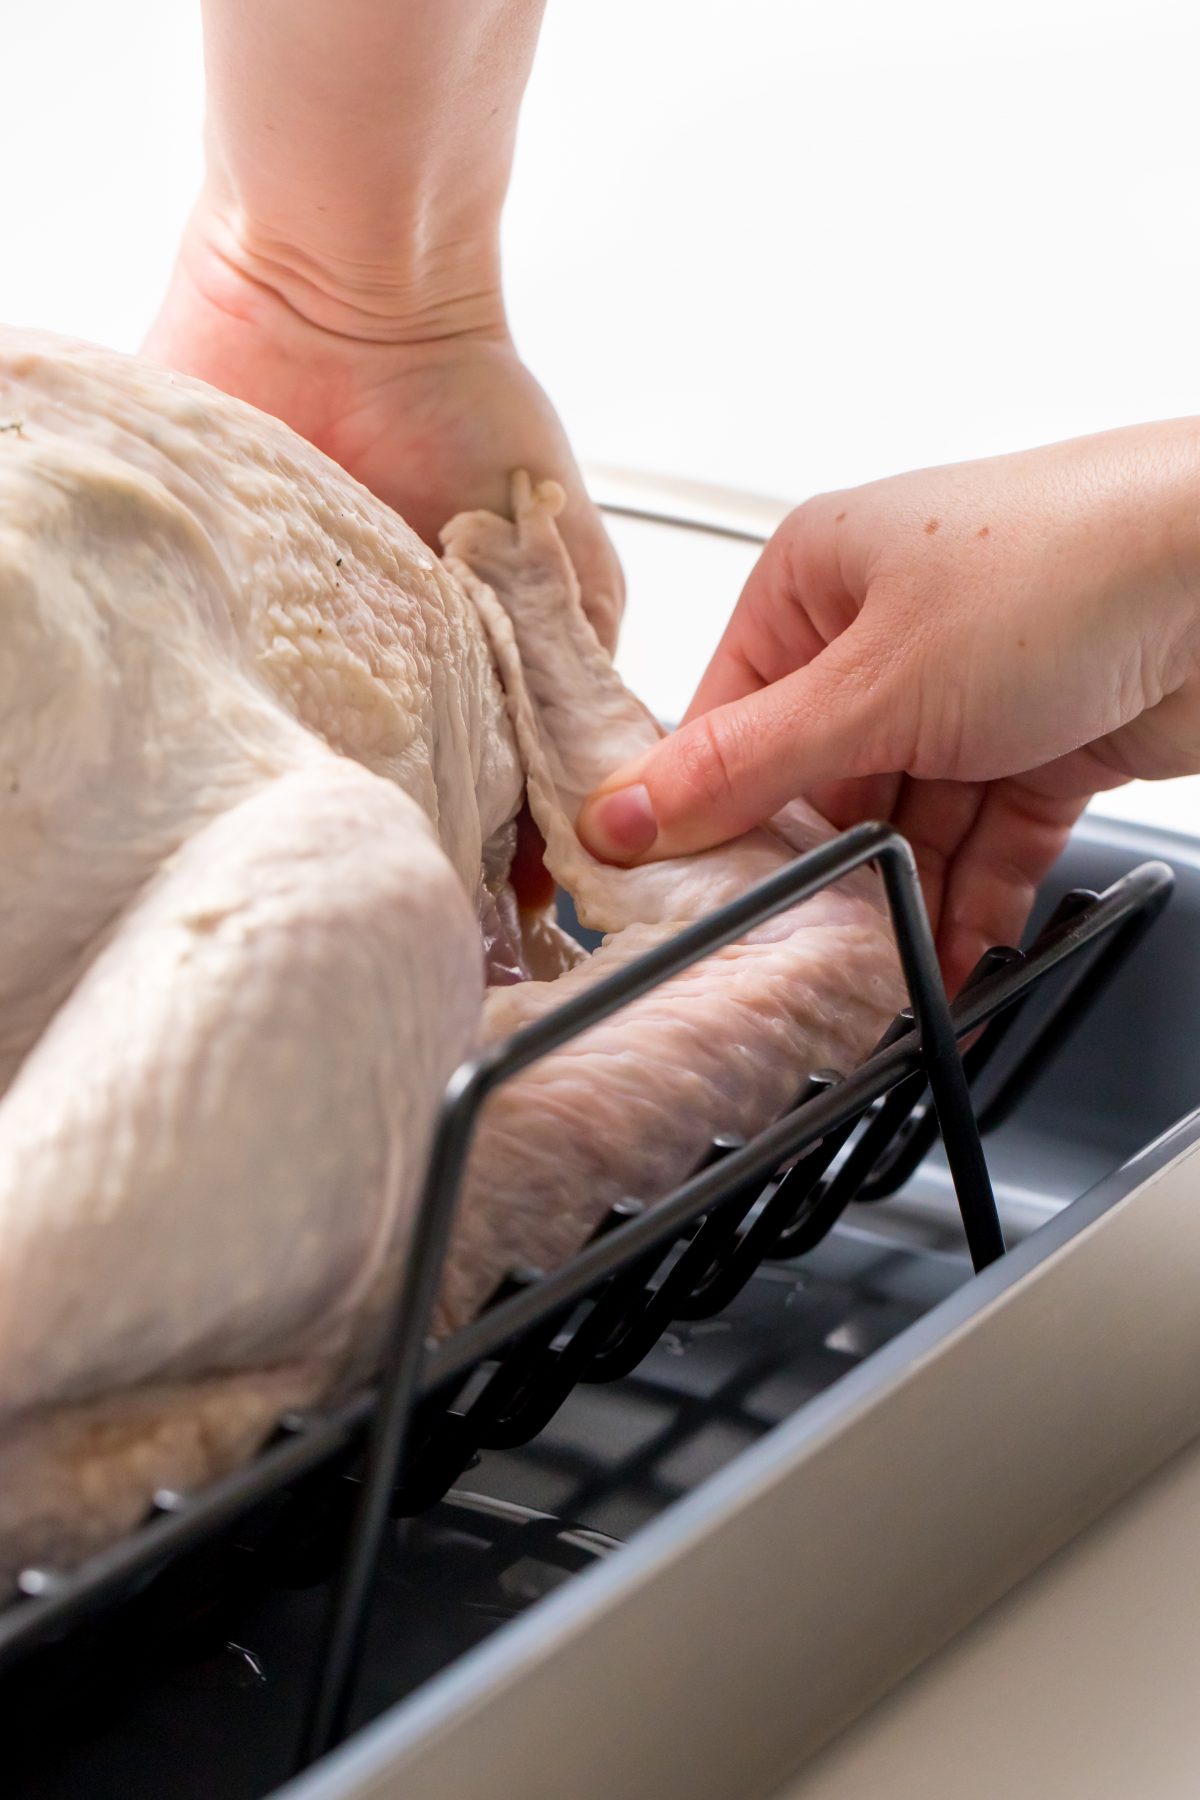 5D4B4999 - Easy No fuss Thanksgiving Turkey - applying compound butter between turkey skin and body